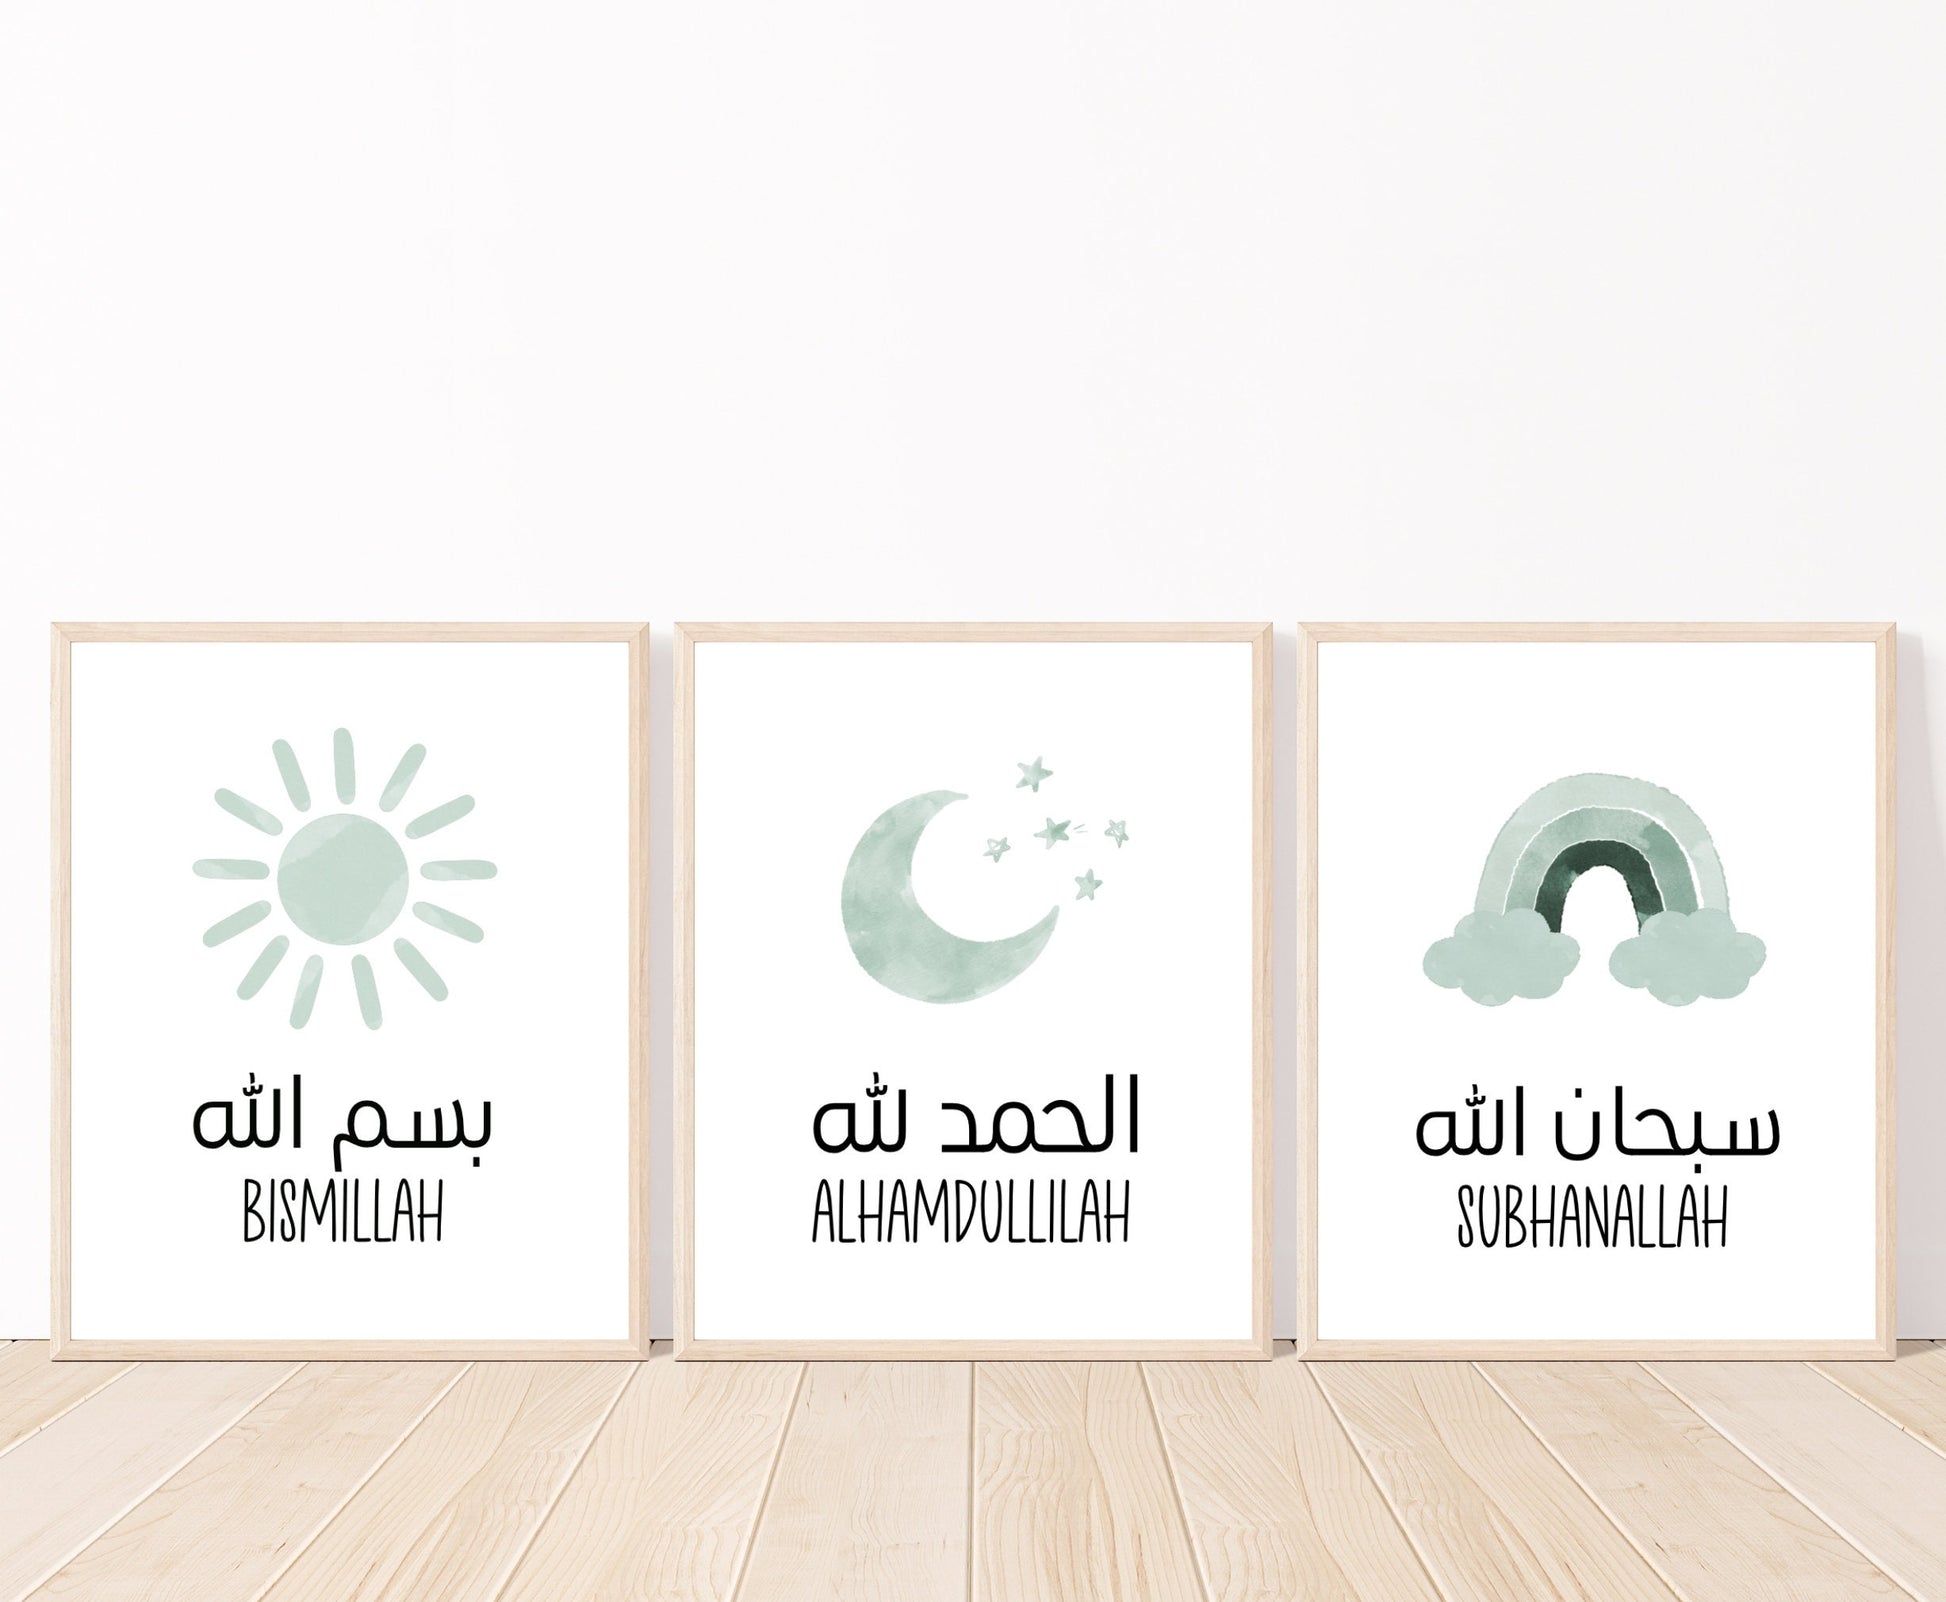 An image of three digital graphics. The first one shows a greyish sun with the word Bismillah written in both English and Arabic below. The second one is a grey crescent with tiny stars beside it with the word Alhamdulillah written in both English and Arabic just below it. The last frame shows a rainbow in different shades of grey, with the word Subhanallah written below it in both Arabic and English.